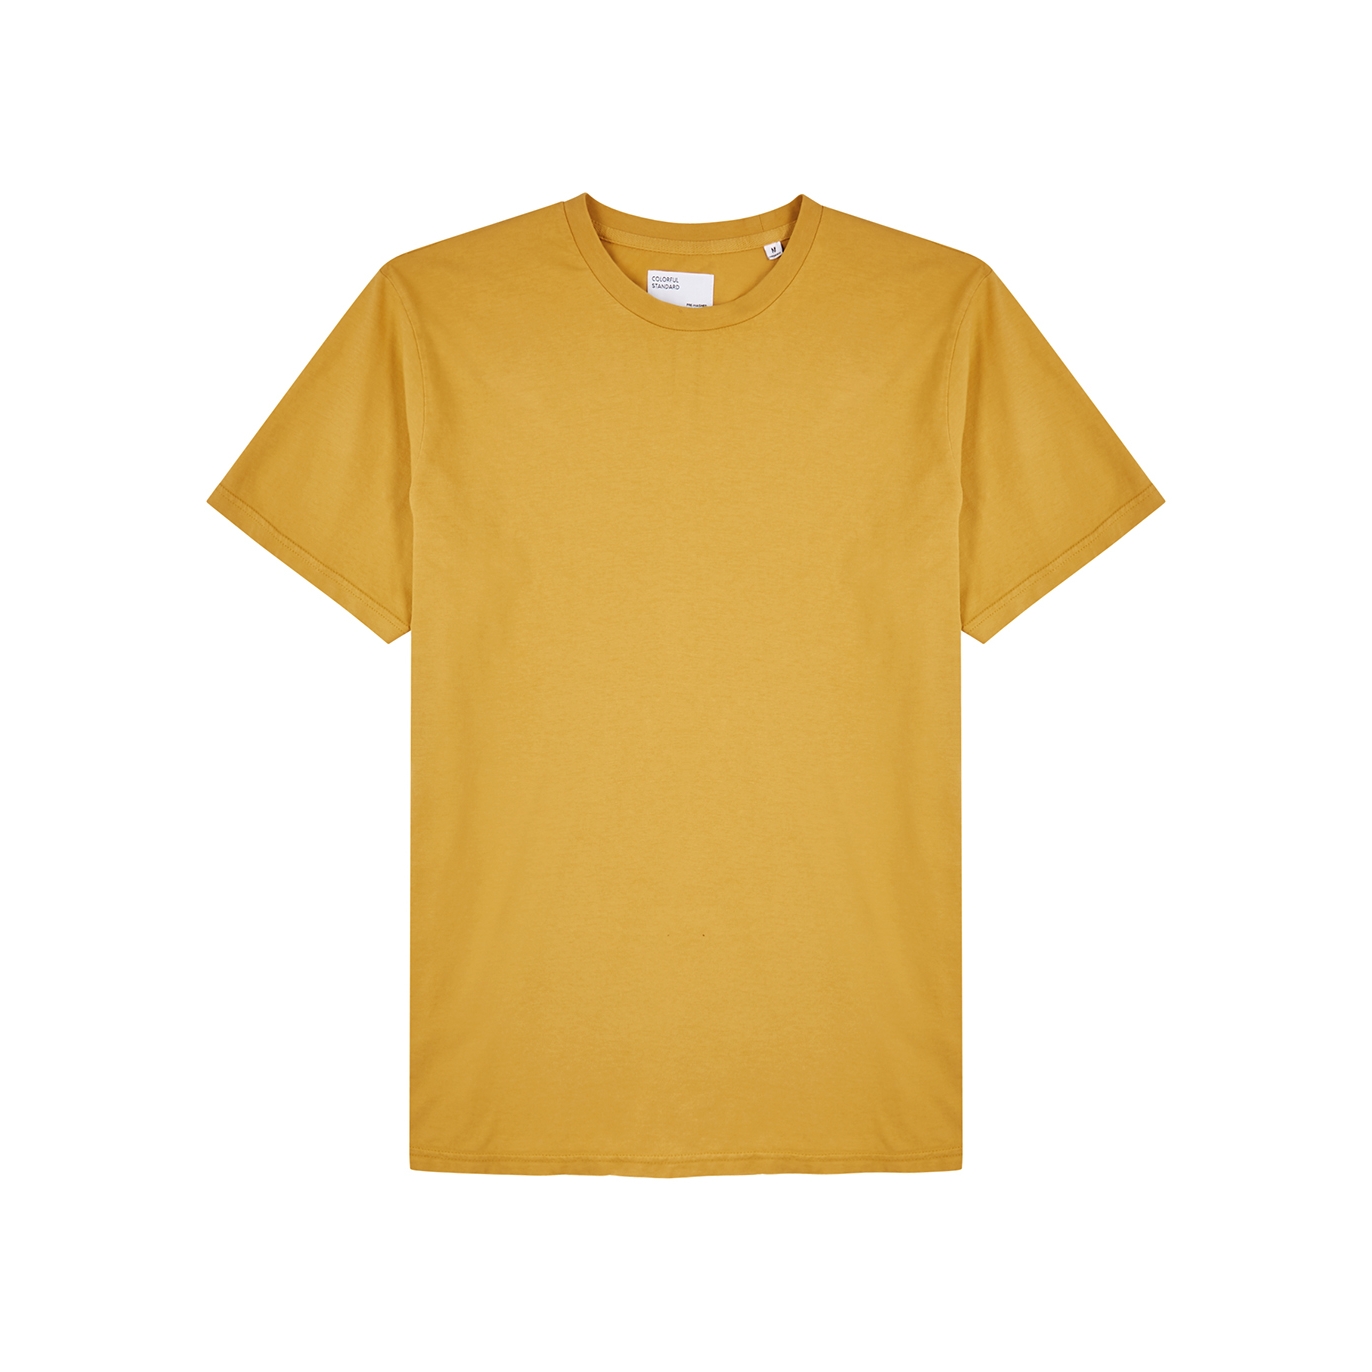 Colorful Standard Bright Yellow Cotton T-shirt